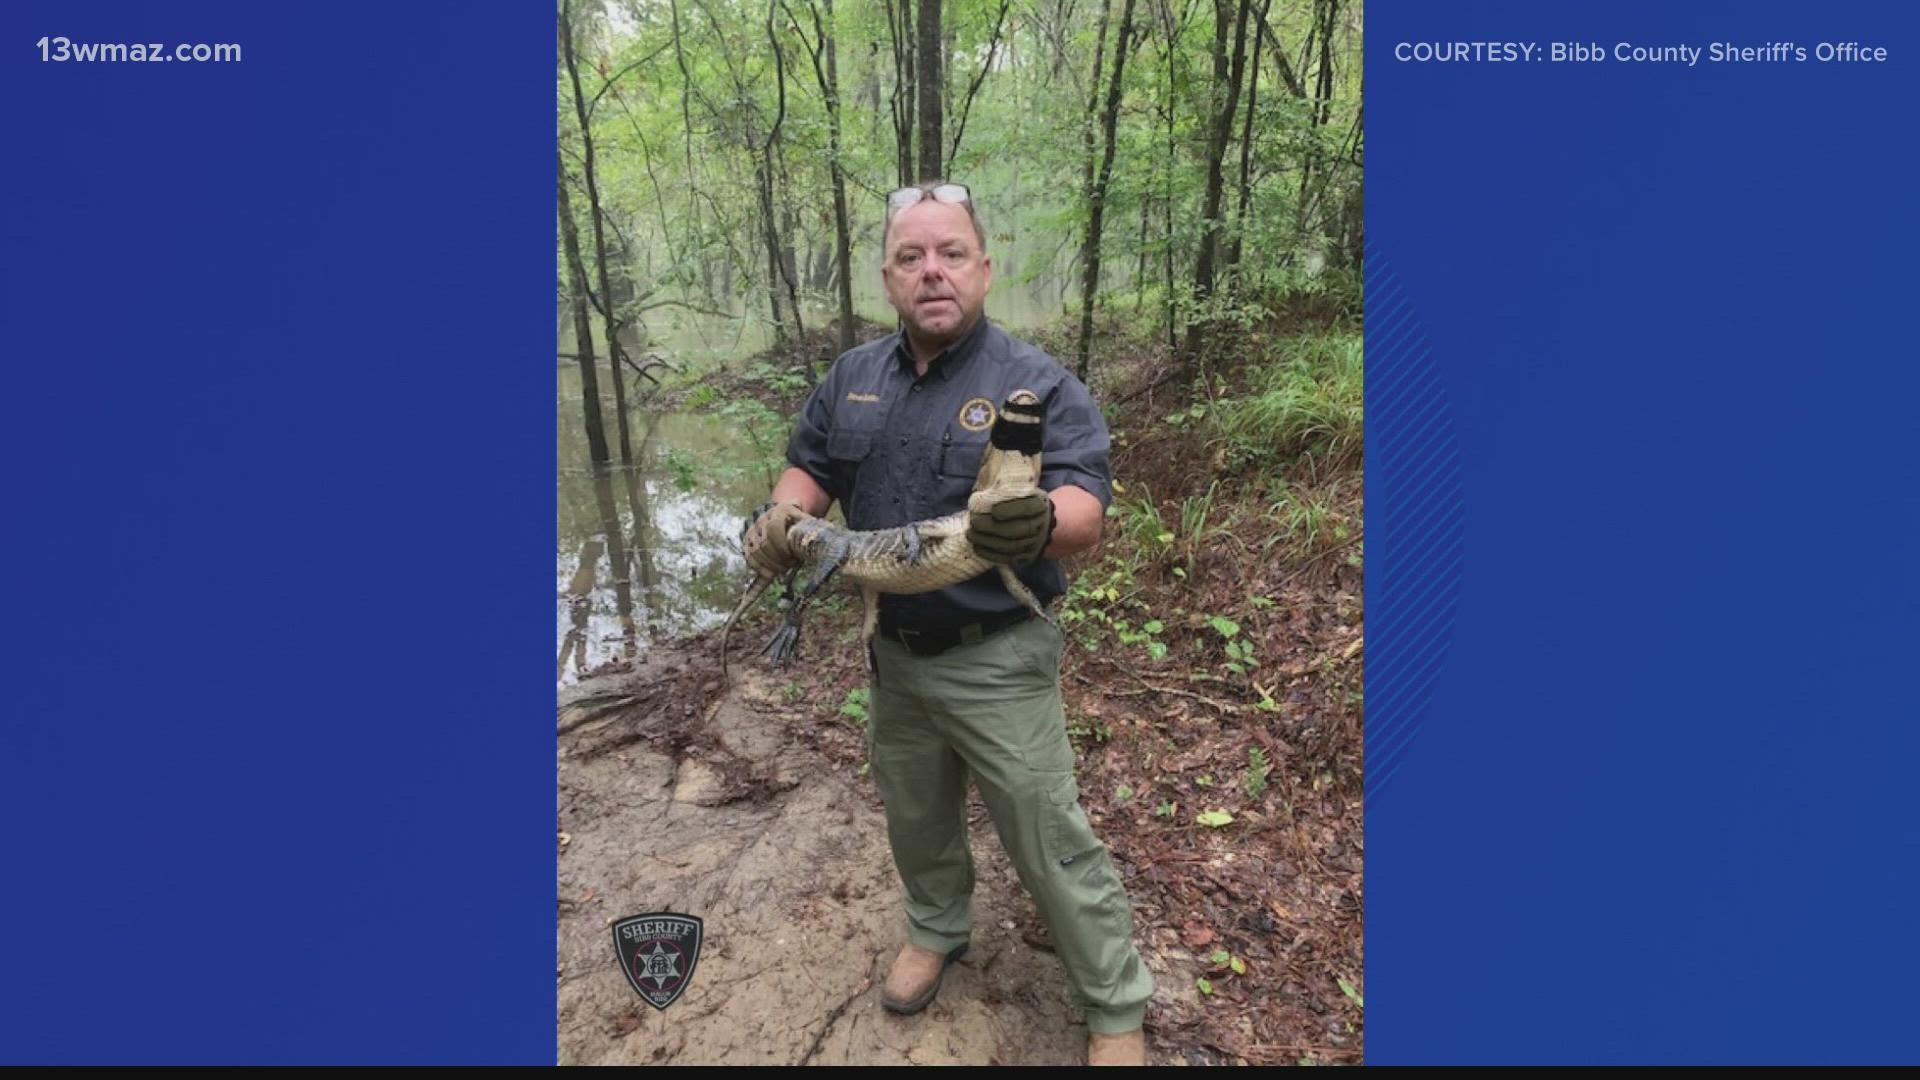 According to a Facebook post from the Bibb County Sheriff's Office, deputies removed a young gator from the laundry room of a home on Allen Road Tuesday.